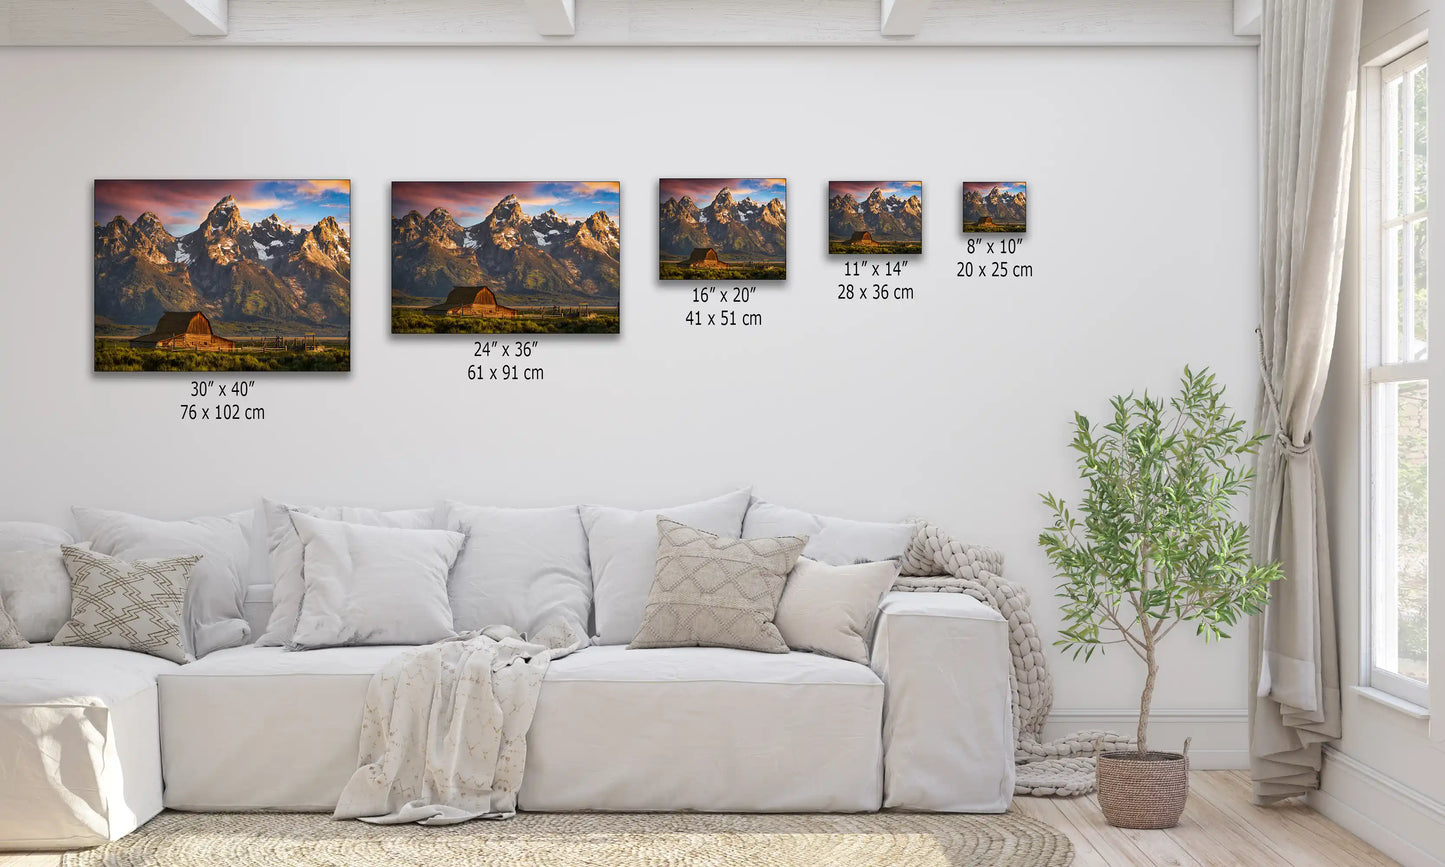 A size comparison chart for wall art featuring the John Moulton Homestead and Teton Mountains at sunrise, displayed over a couch for scale.